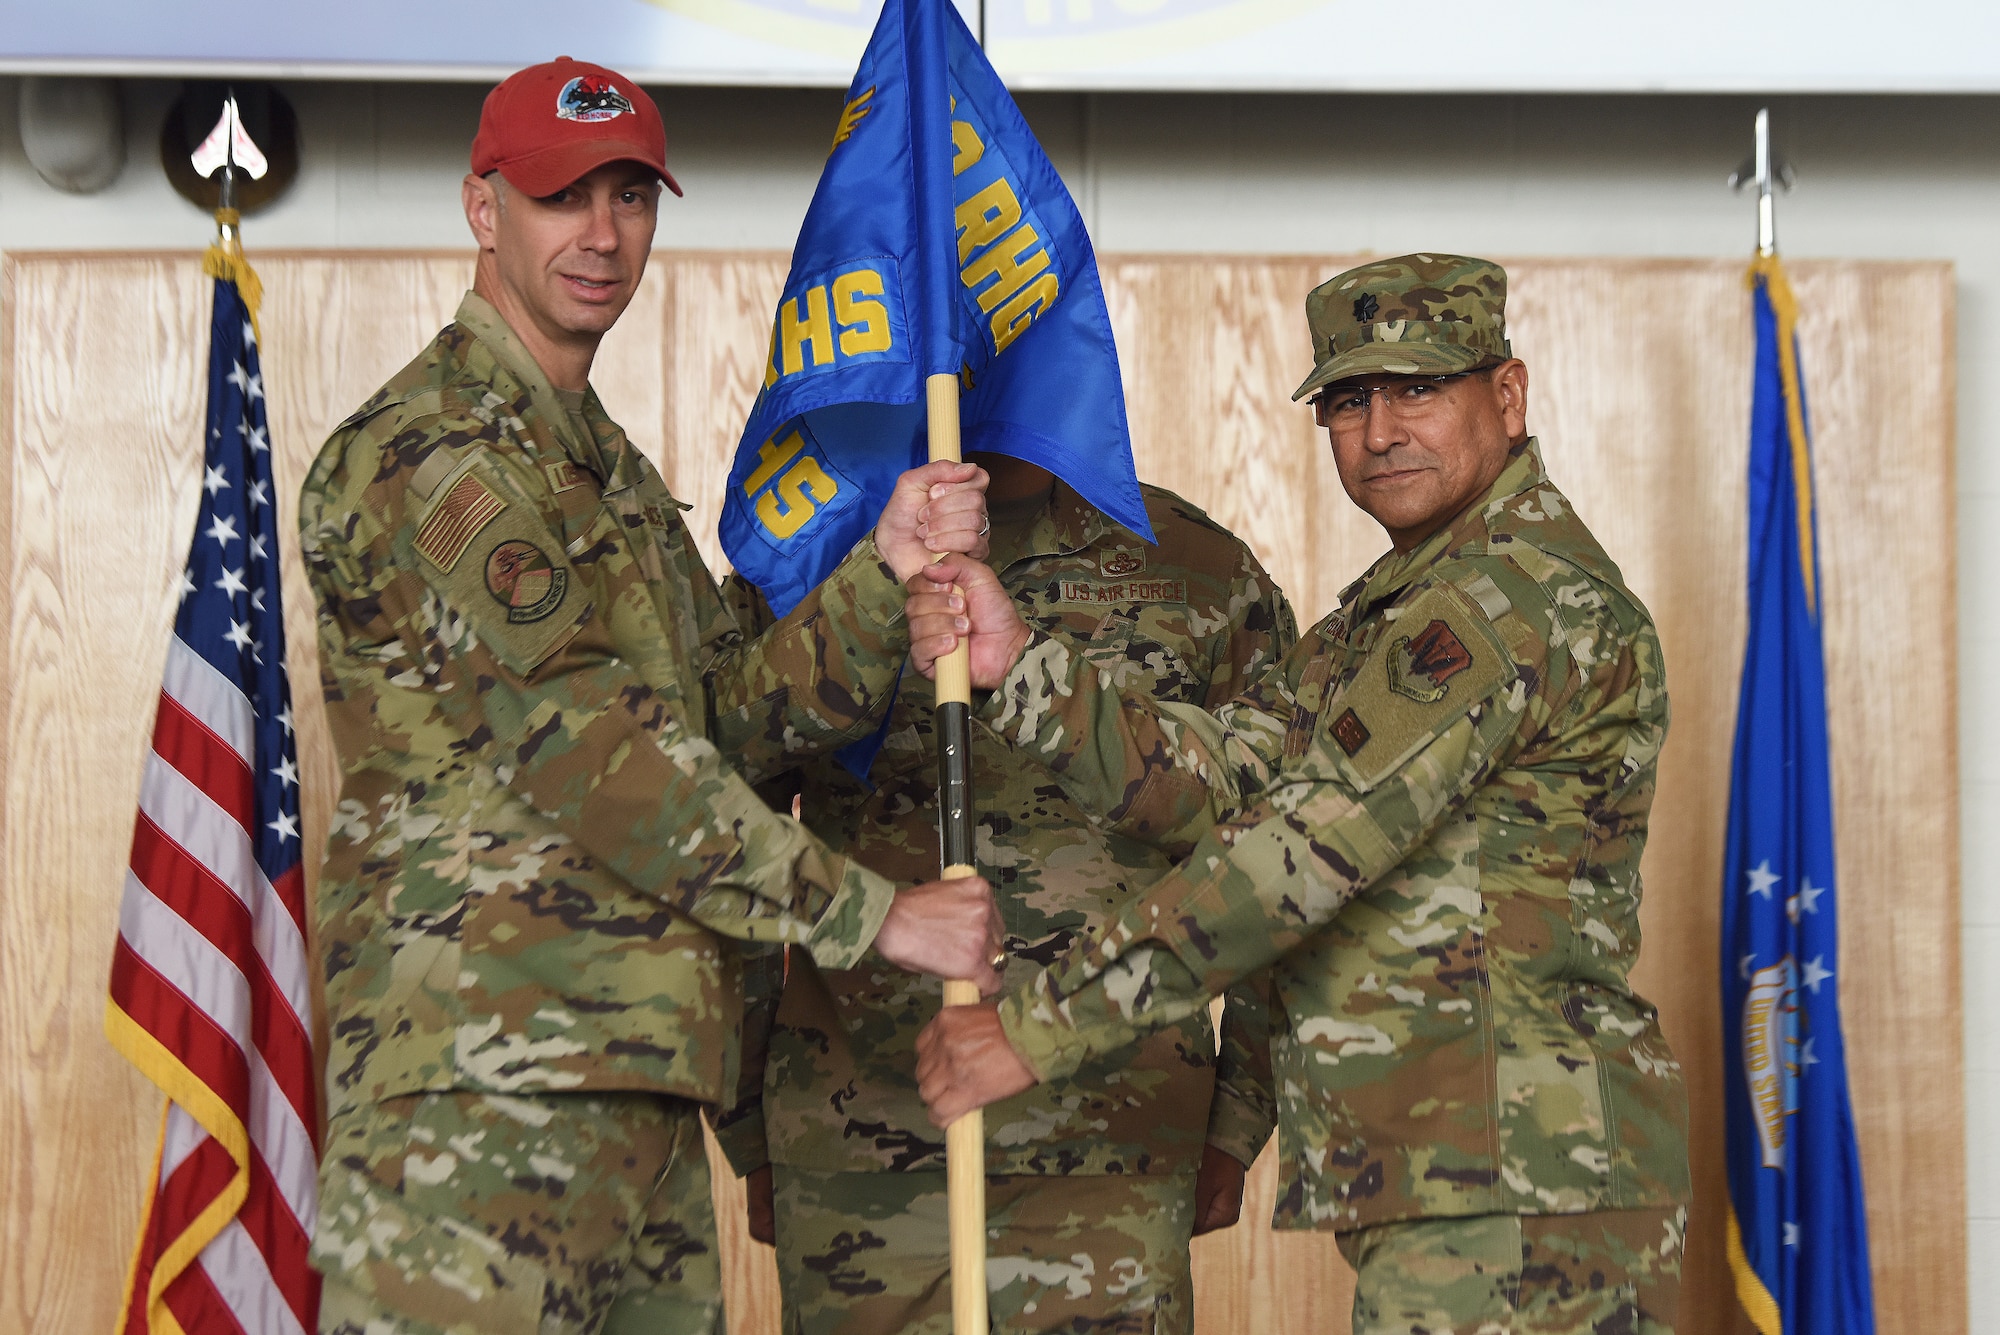 Lt. Col. Javier Velazquez, right, accepts command of the 819th RED HORSE Squadron from Col. Jason Loschinskey, 819th RHS outgoing commander, during a change of command ceremony June 3, 2020, at Malmstrom Air Force Base, Mont.